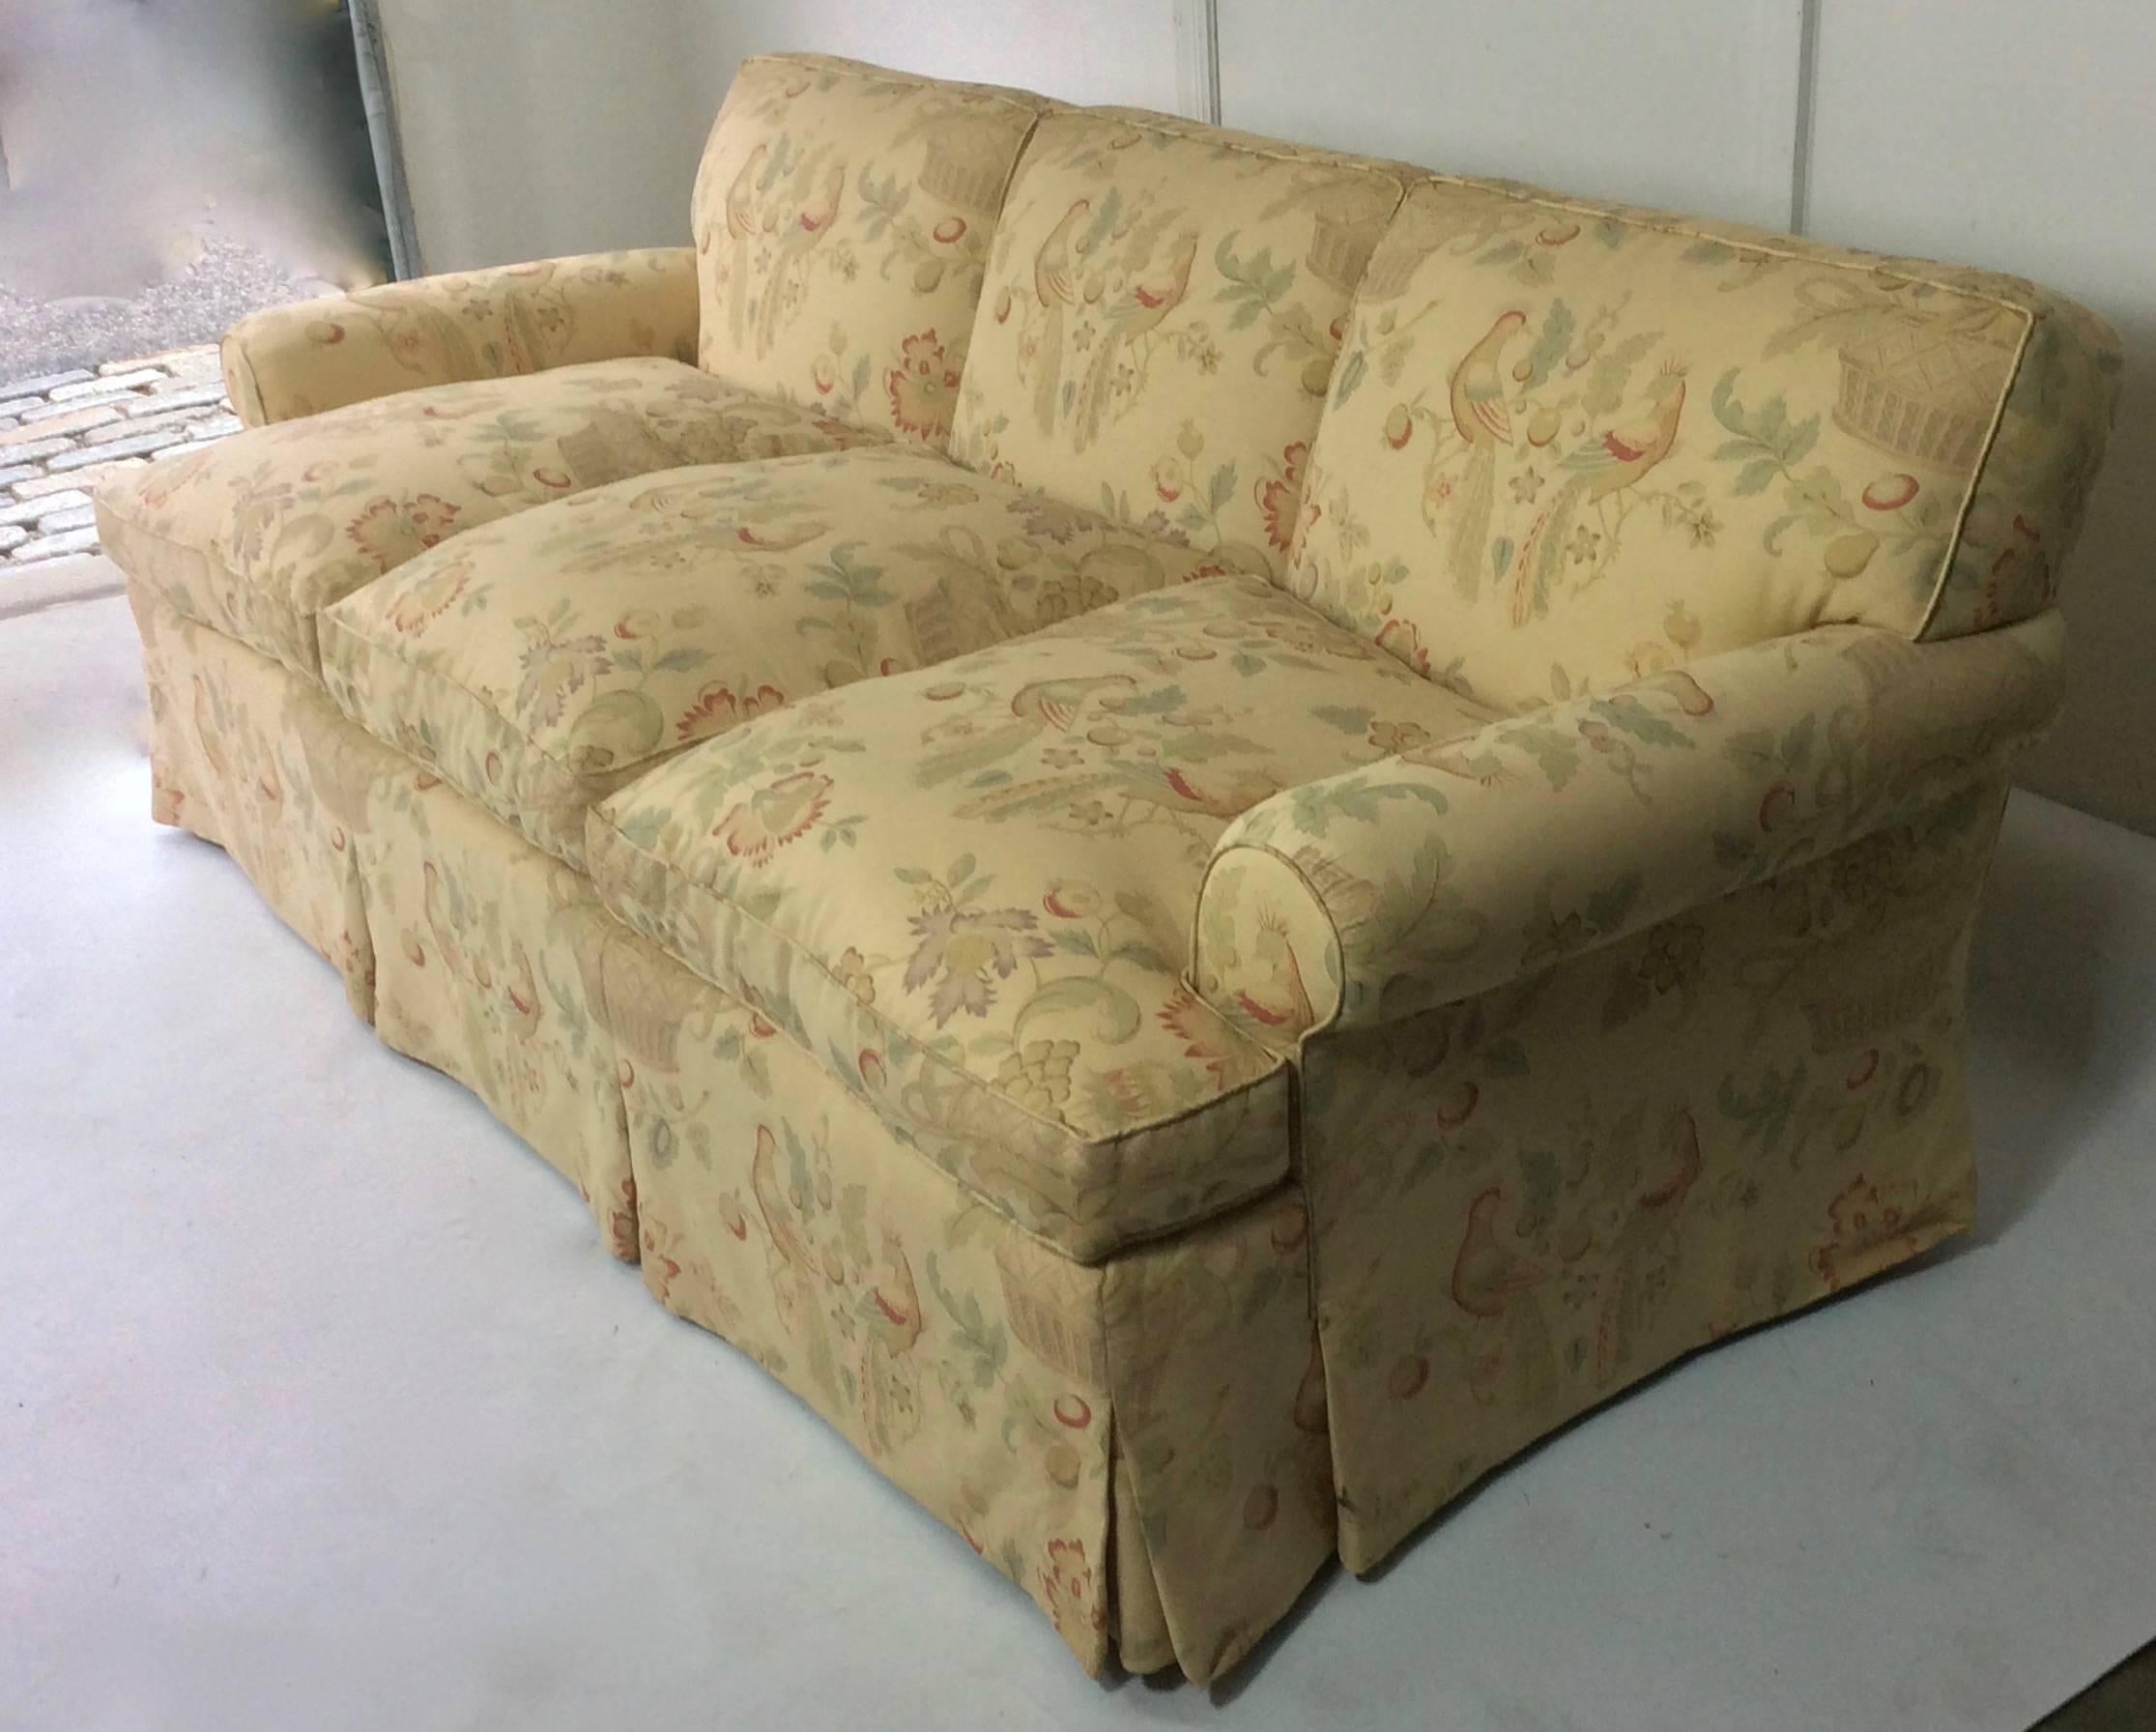 George Smith style custom English rolled arm sofa, three-seat, deep seated and extremely comfortable, with down cushions and pleated dressmaker skirt. Custom upholstered, by master upholsterer in Birds and Basket pattern by noted small batch,